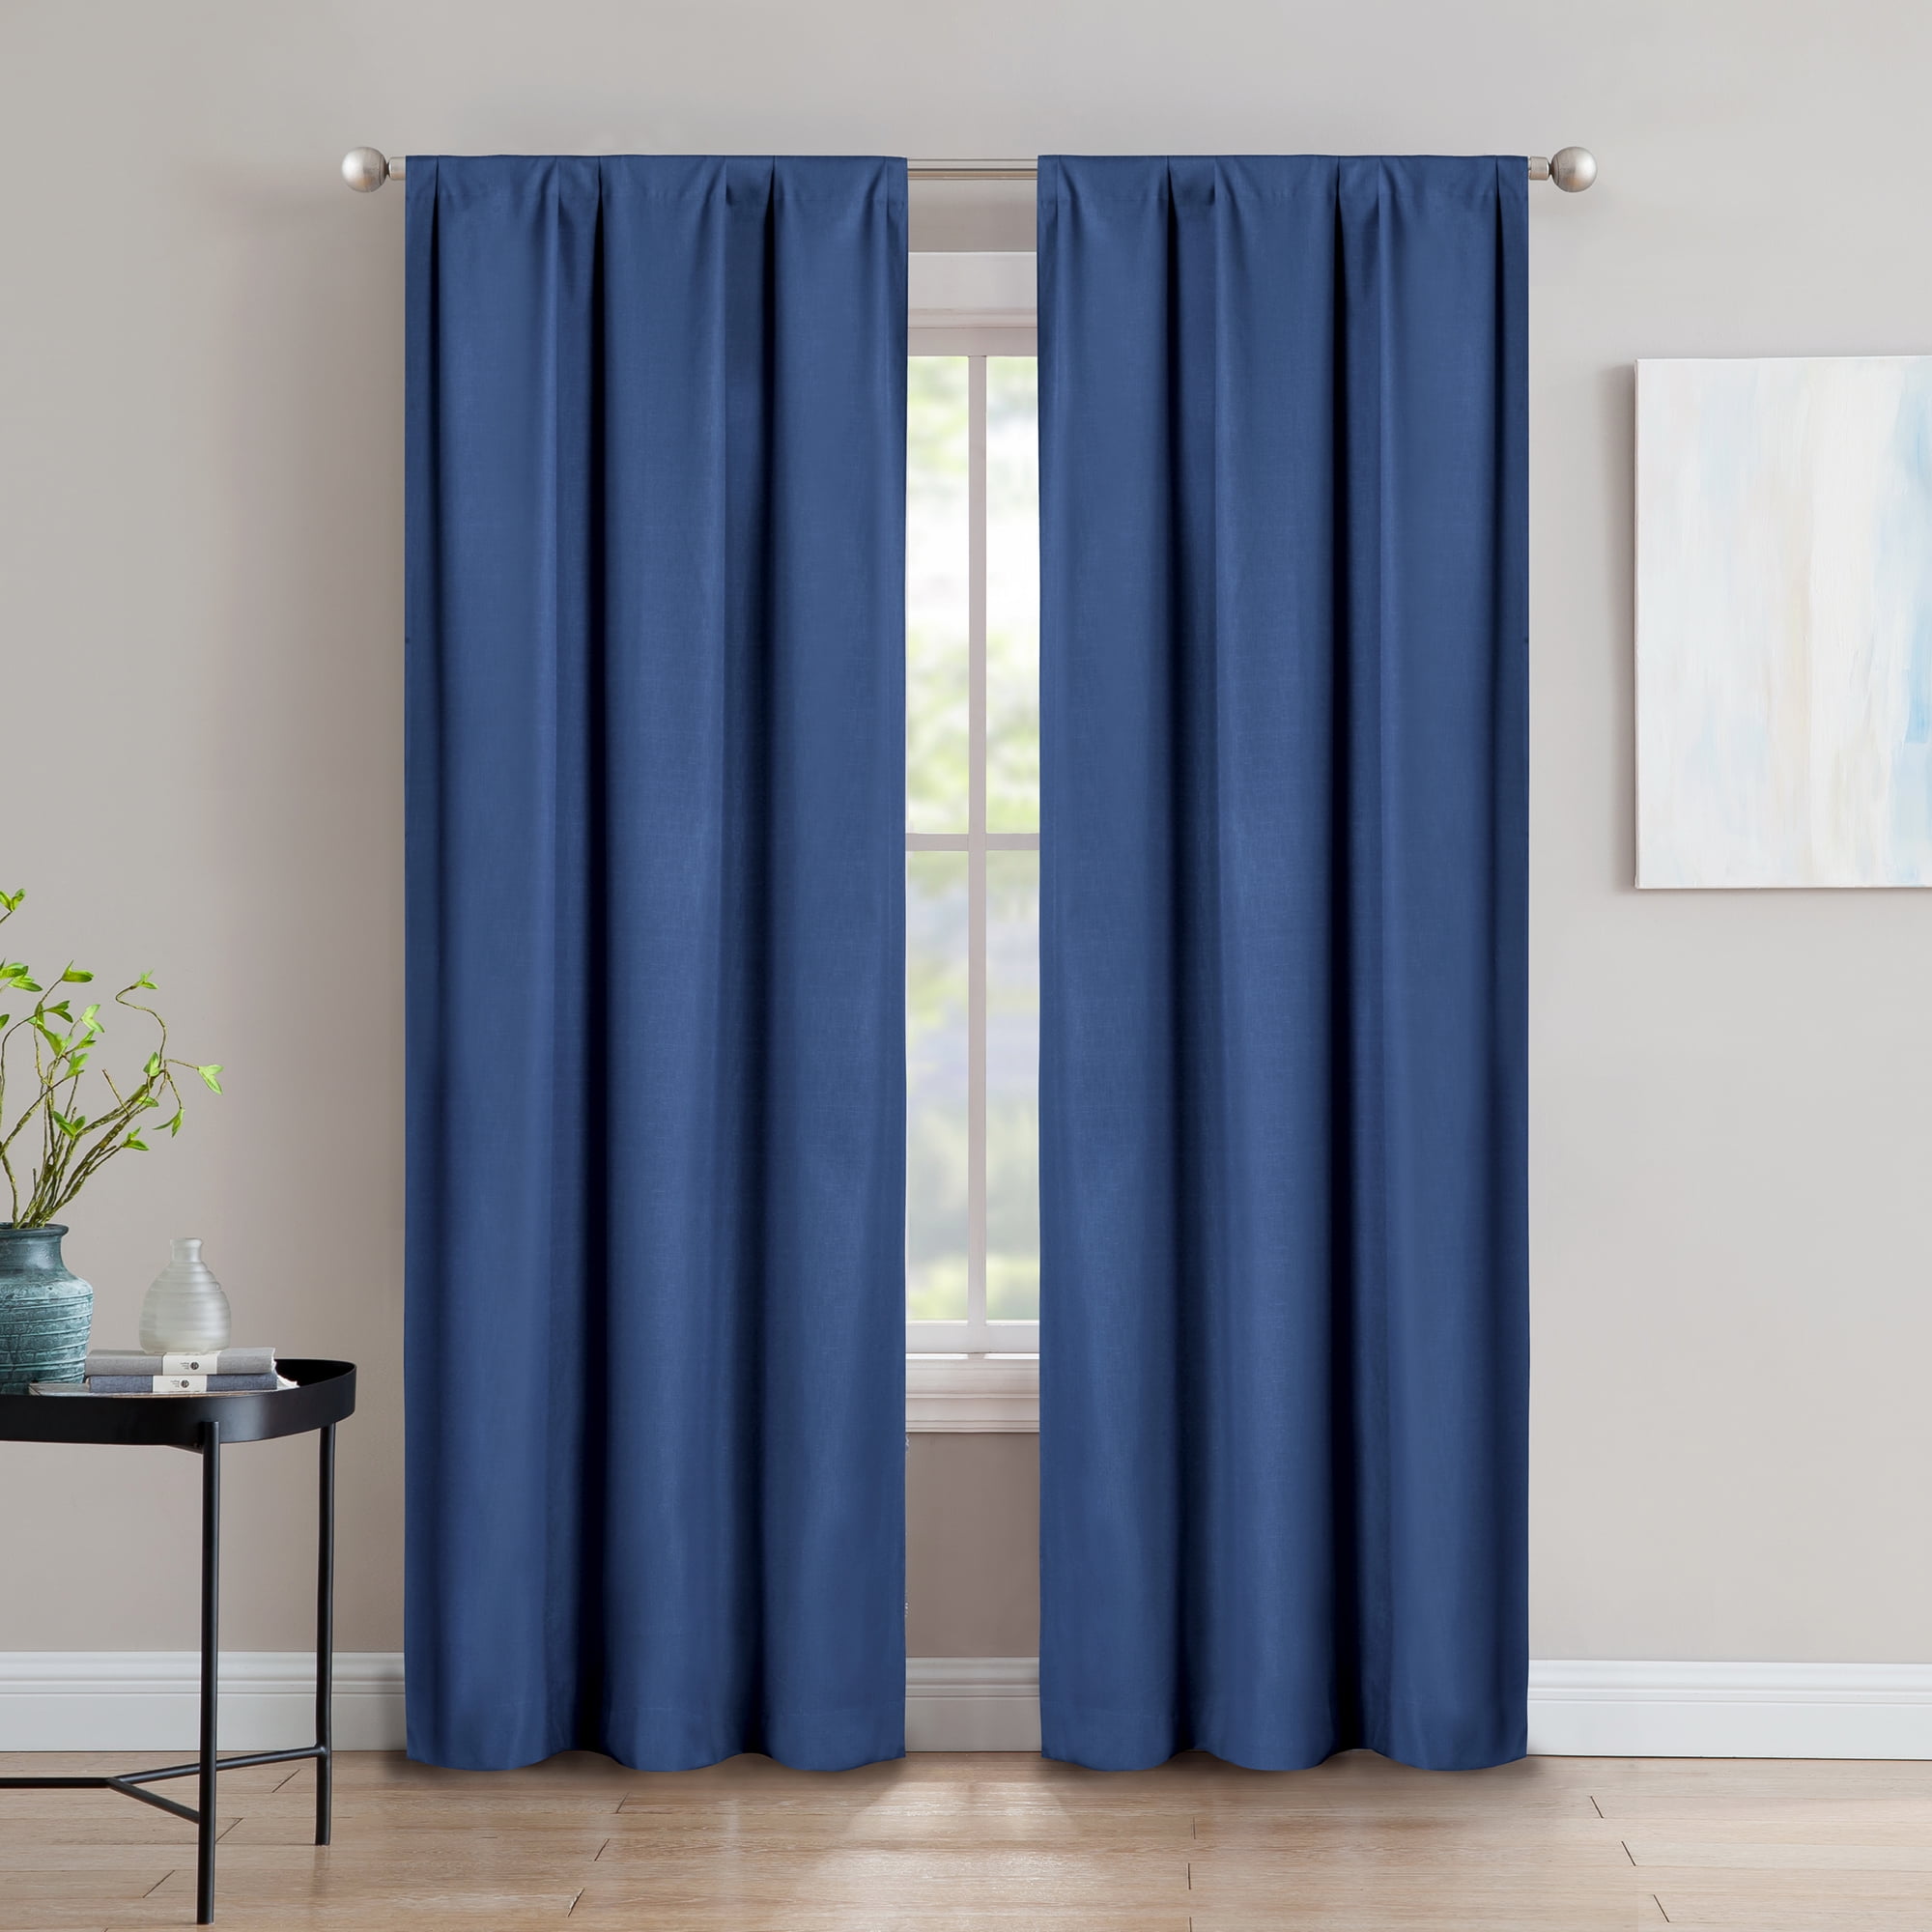 SUN+BLK Thermal Back Blackout Curtain Panel Pair with Rod Pocket, Denim ...